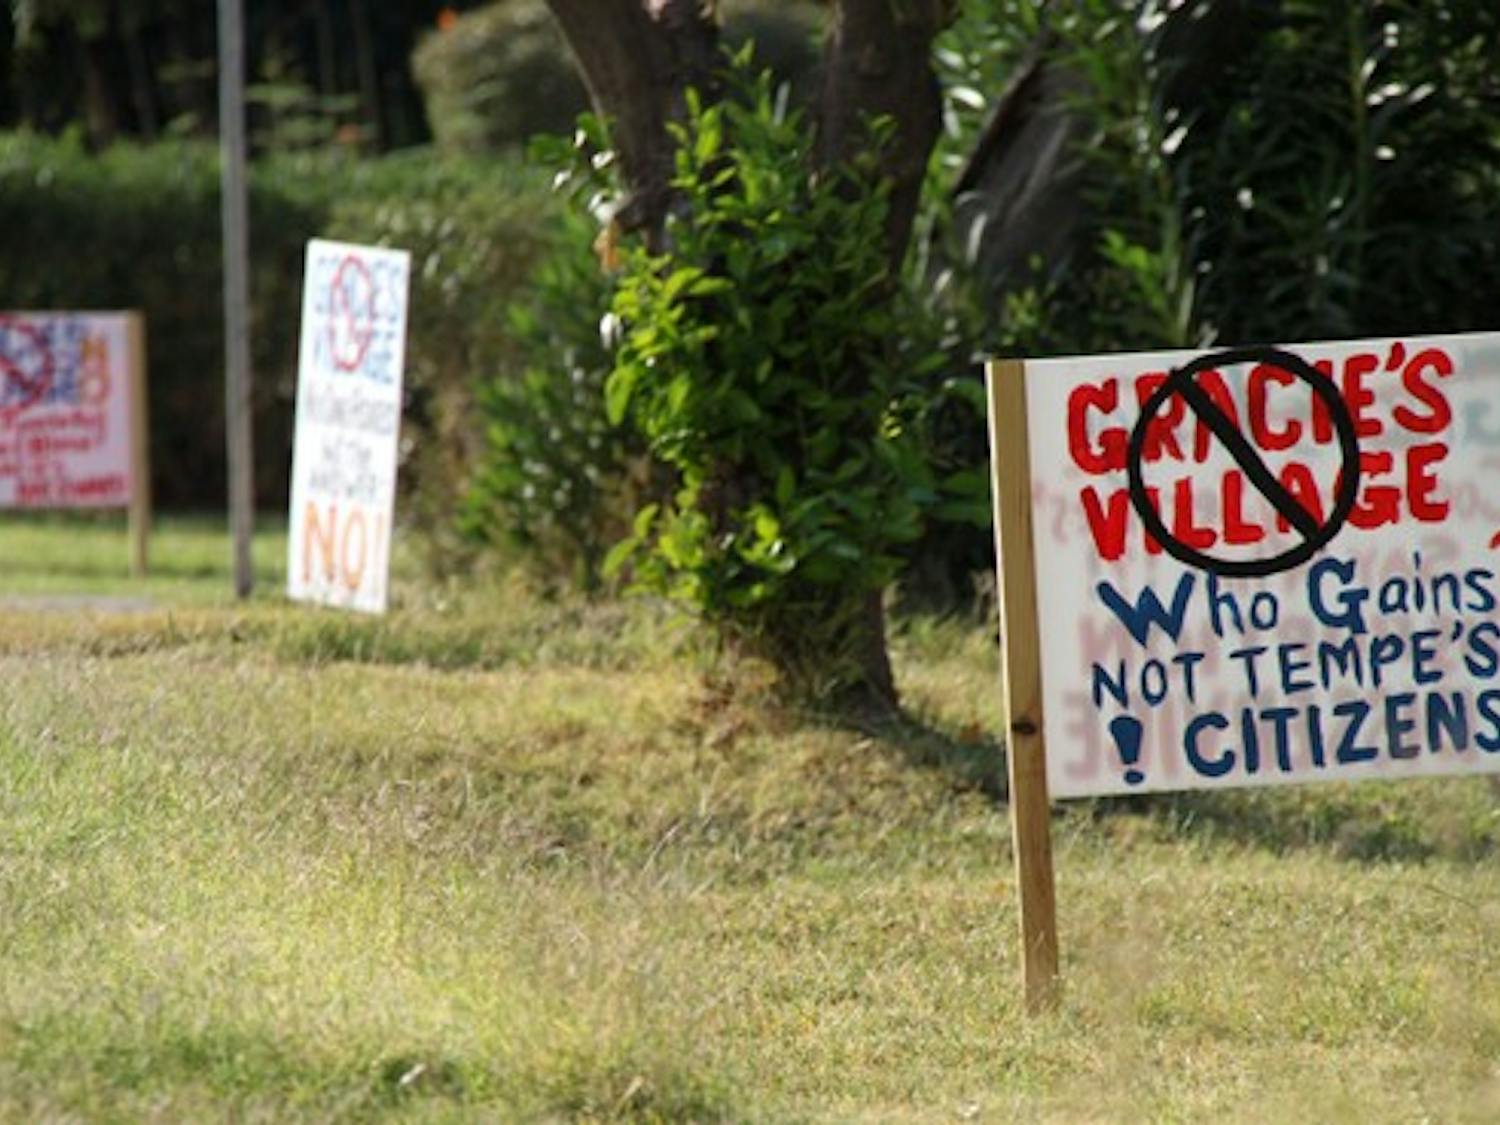 NOT HAPPY: Neighbors of Gracie’s thrift store express their opposition to the proposed building plans with scattered yard signs. (Photo by Rosie Gochnour)